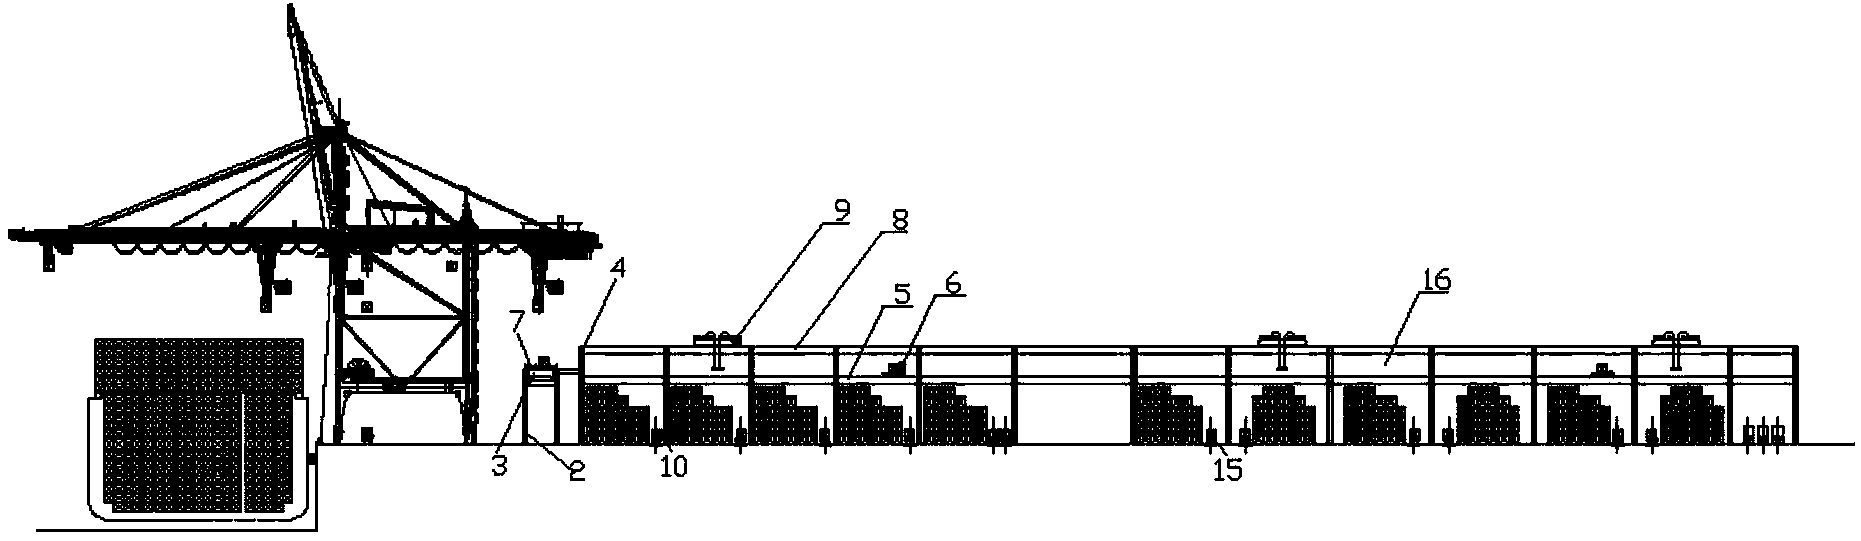 Passing type double-trolley quay-crane loading and unloading system and method